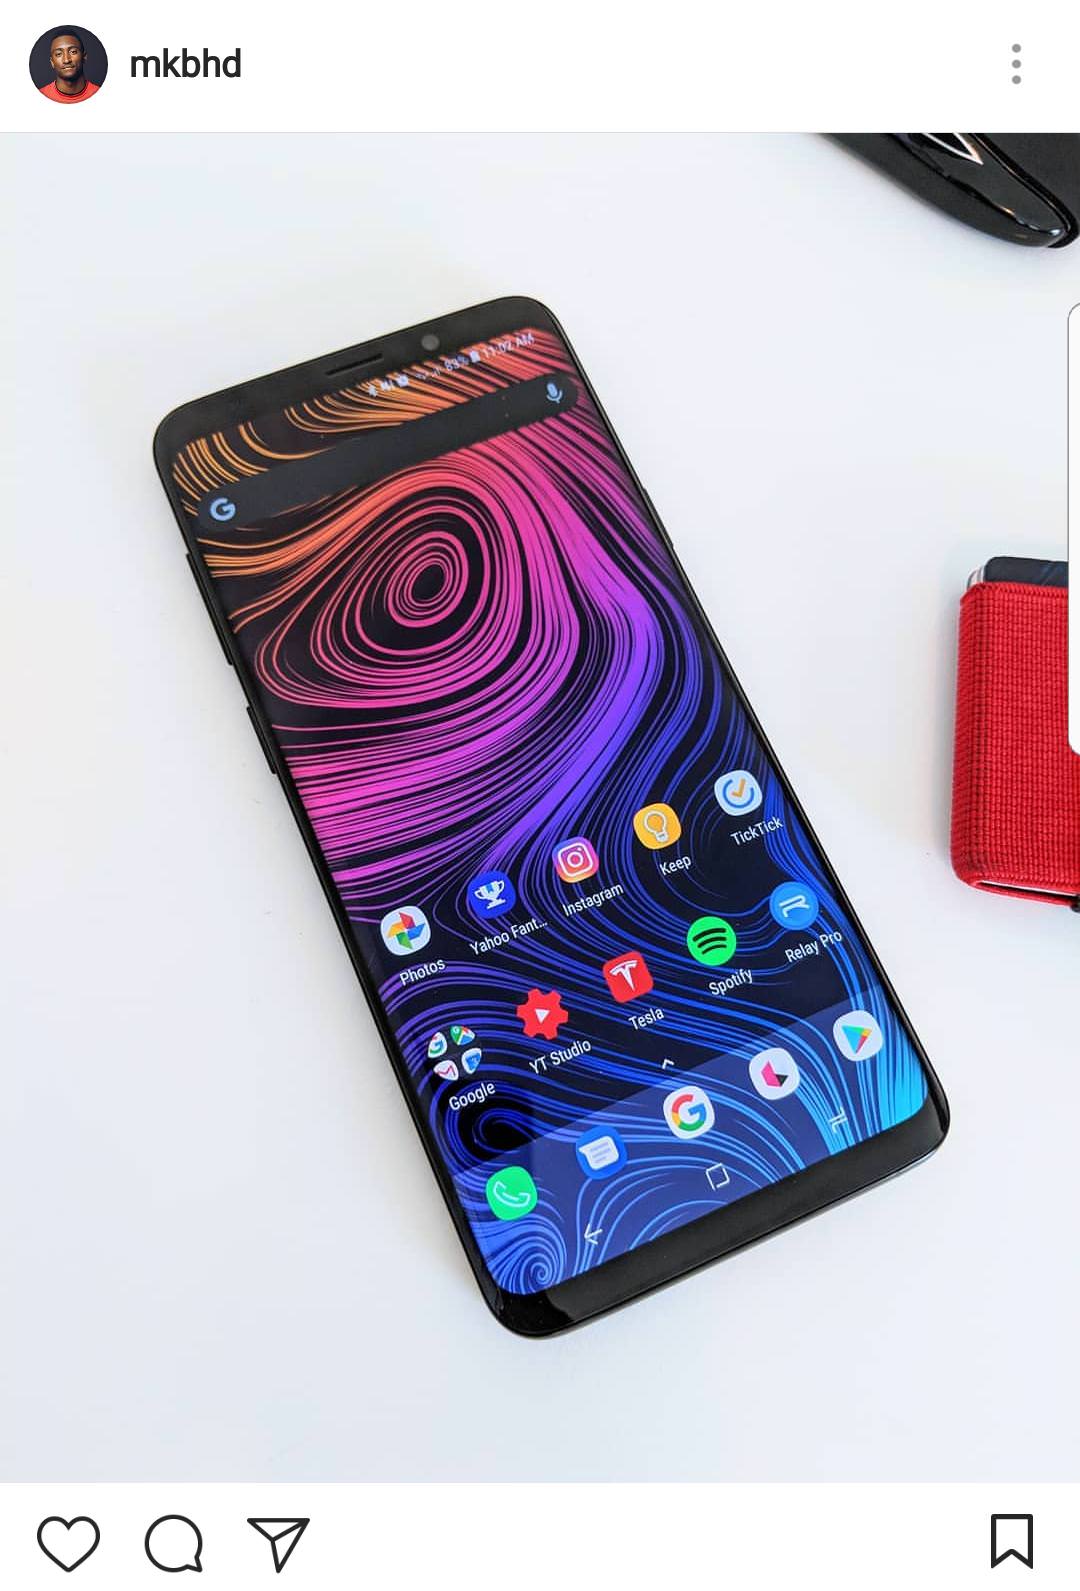 This Wallpaper Is Nice Anyone Know Where To Find It MkbHD